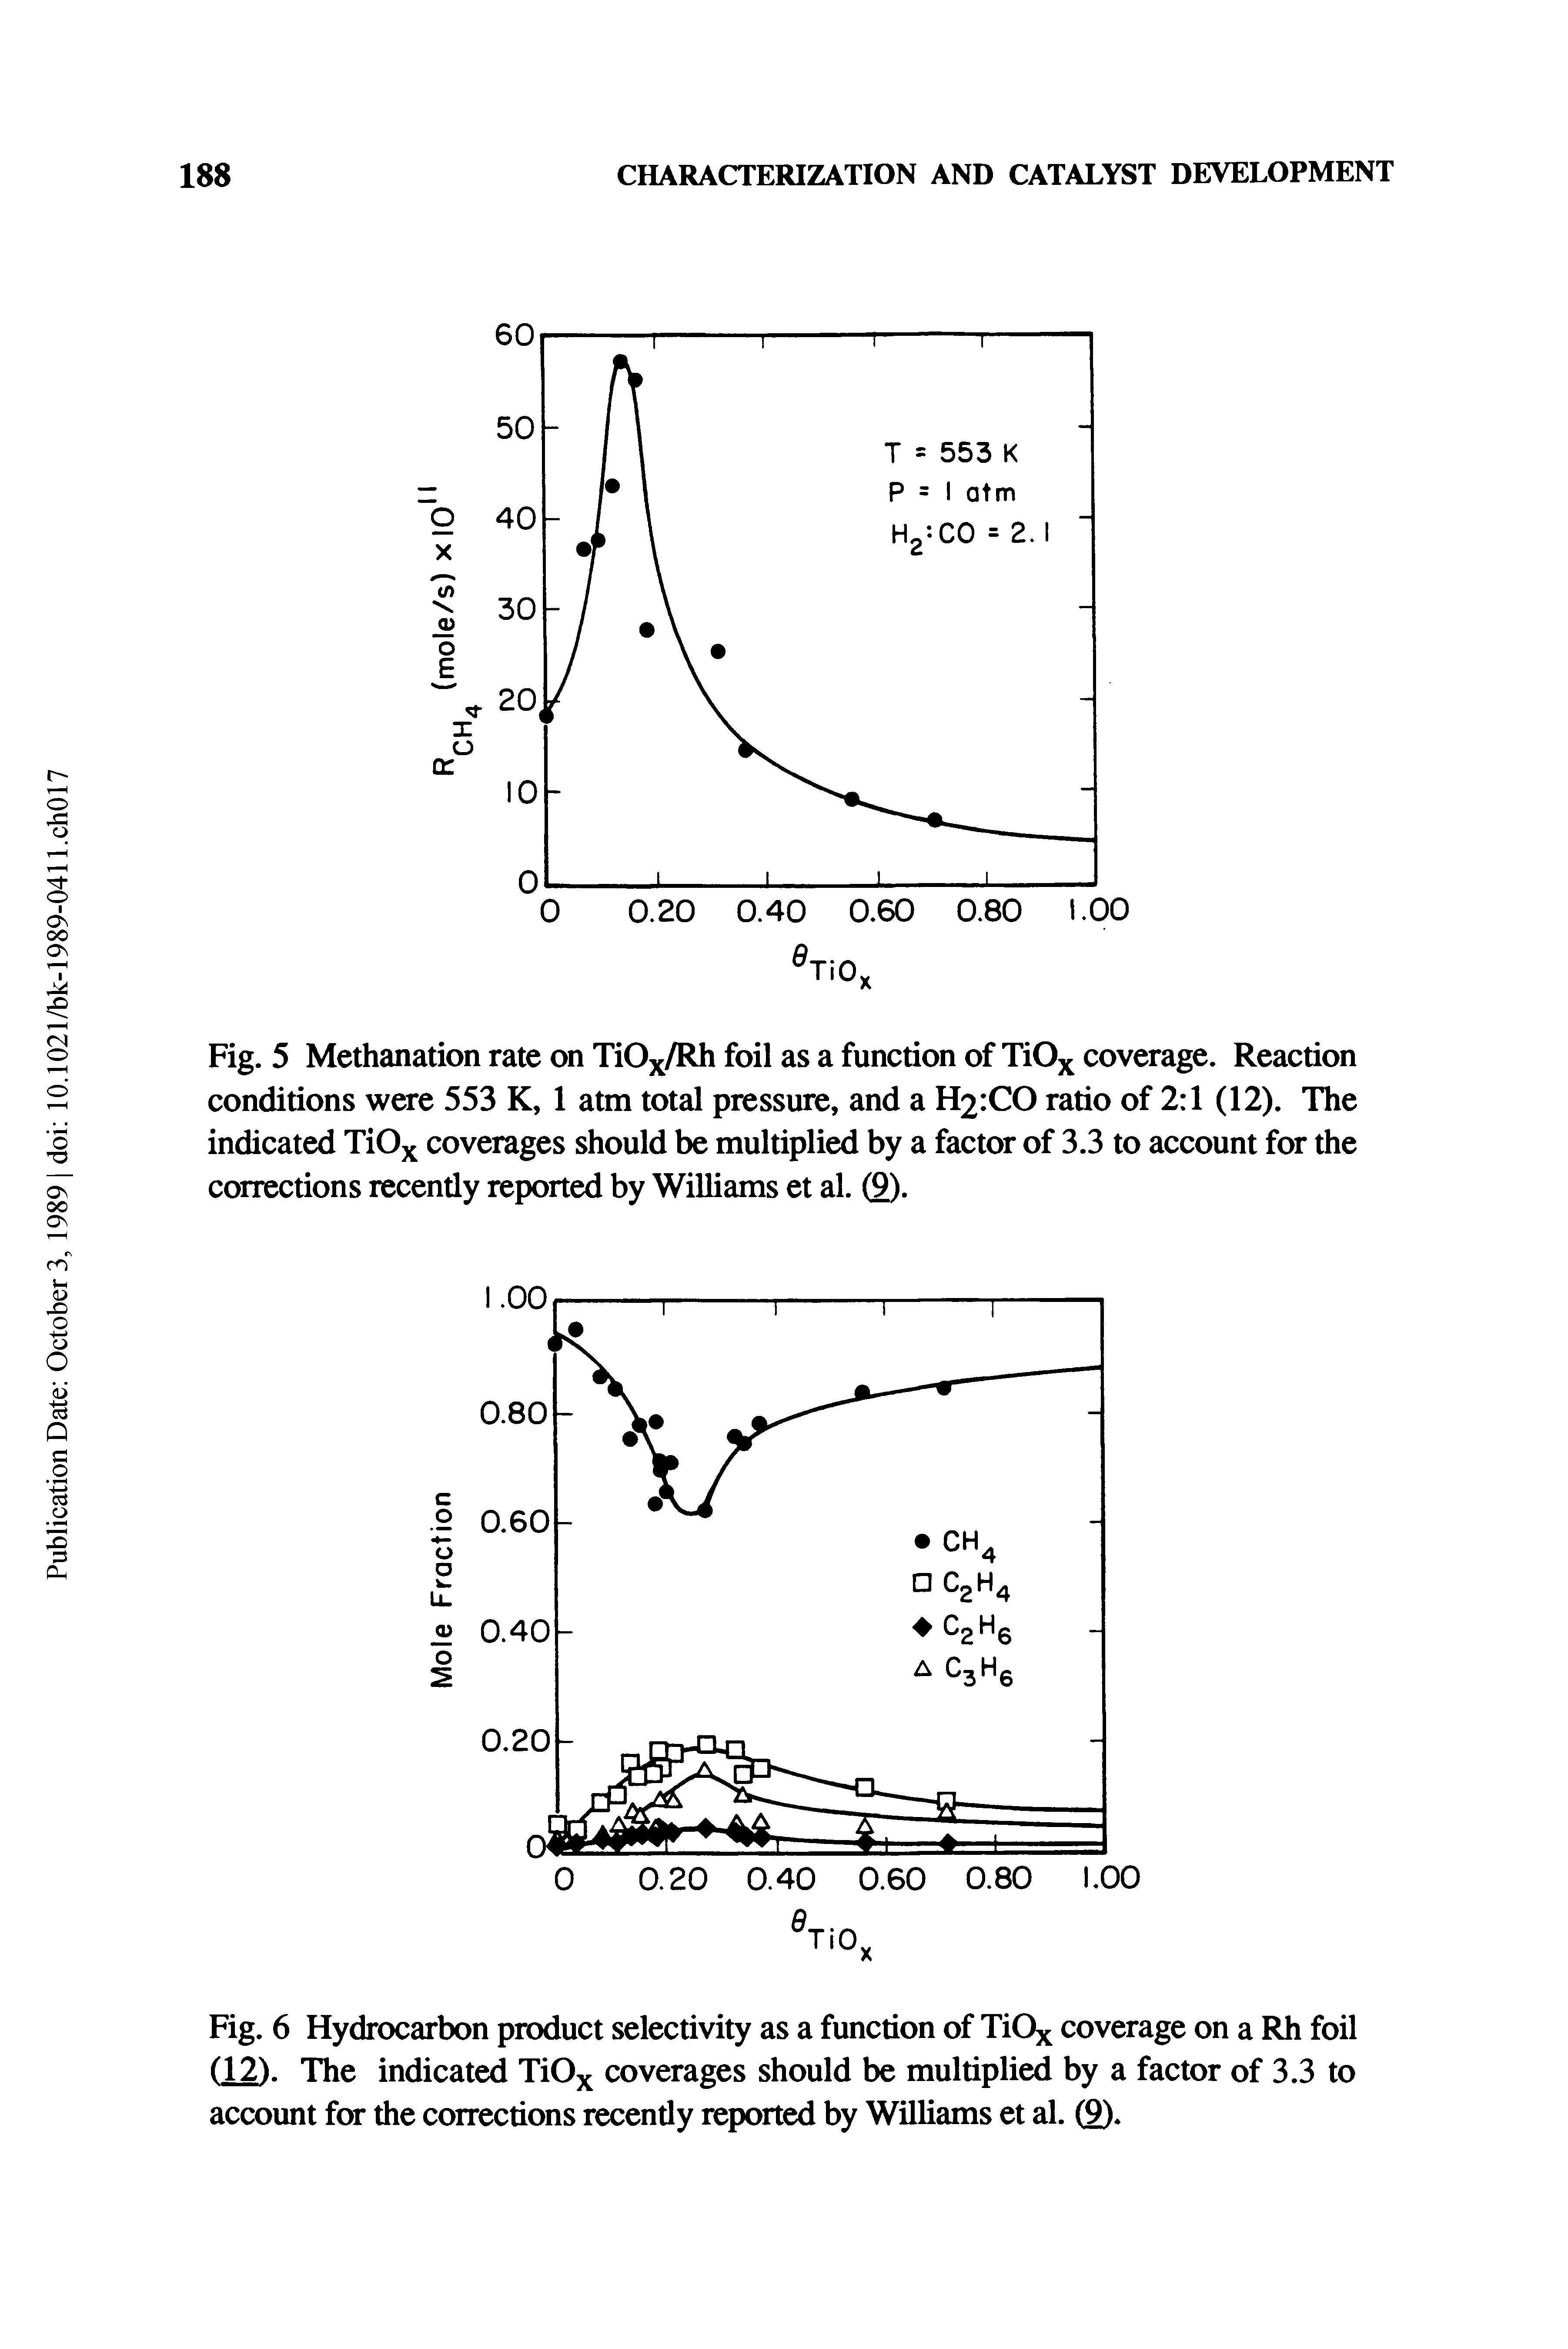 Fig. 6 Hydrocarbon product selectivity as a function of TiOx coverage on a Rh foil (12). The indicated TiOx coverages should be multiplied by a factor of 3.3 to account for the corrections recently reported by Williams et al. (9).